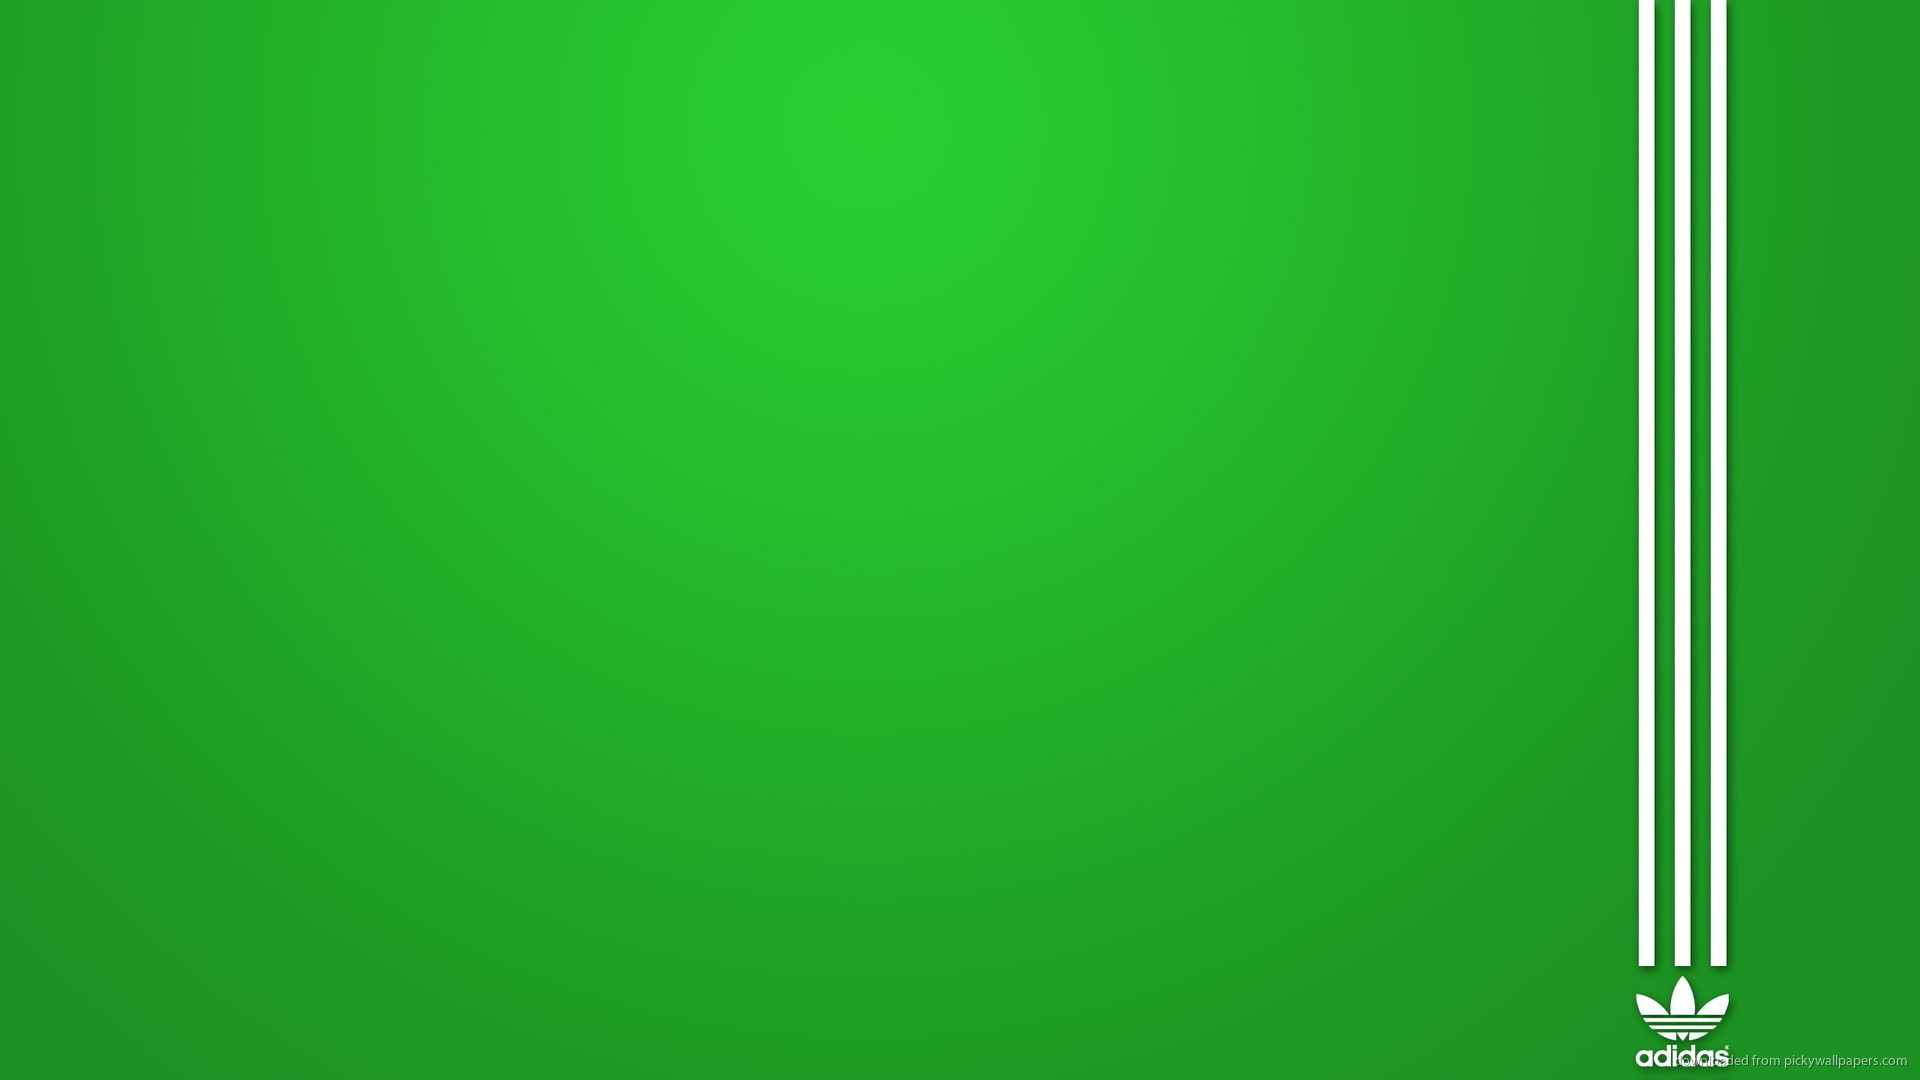 Green Adidas Wallpaper Background picture